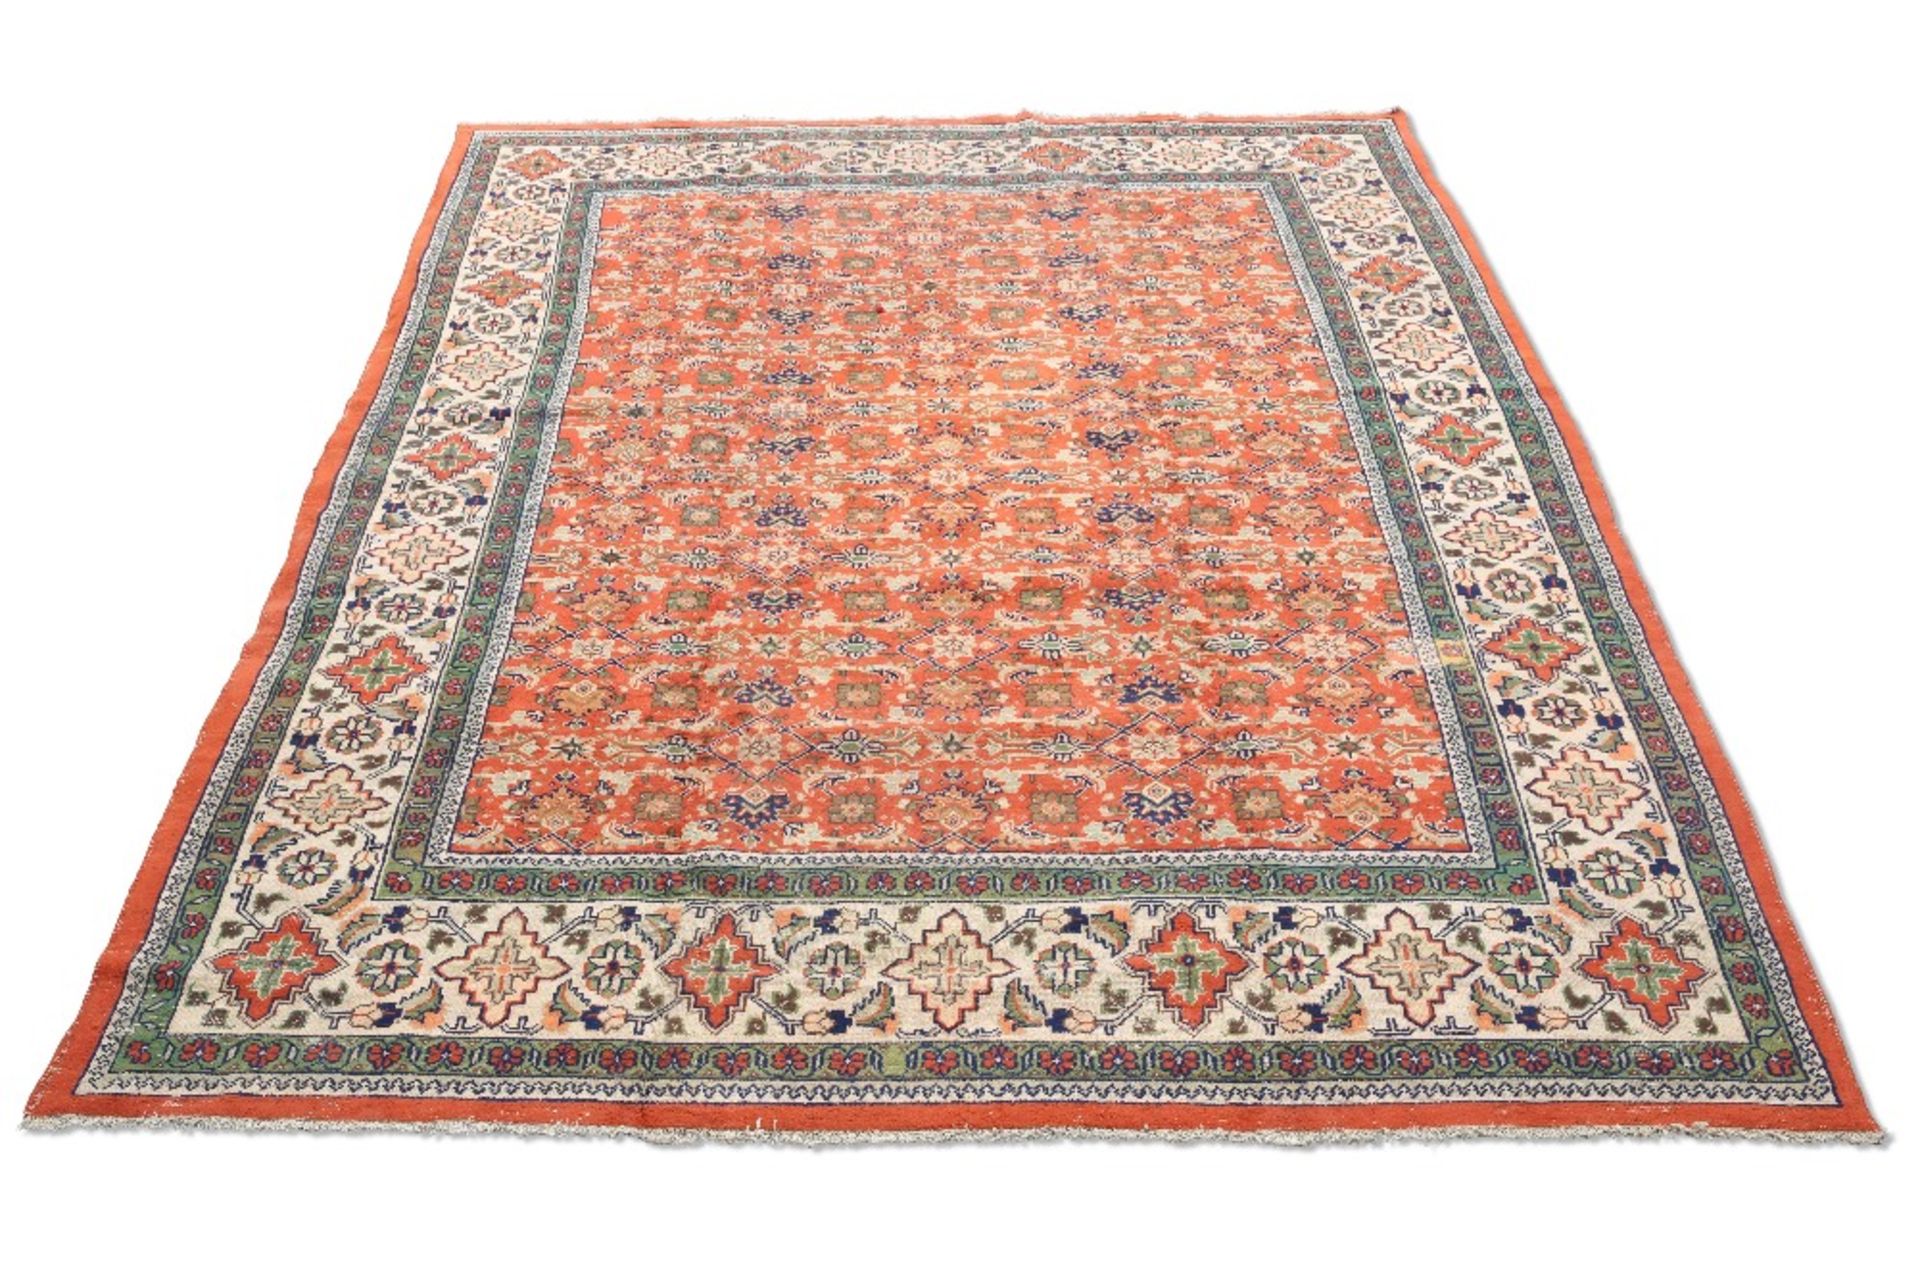 A TURKISH CARPET, CIRCA 1970,ÿthe orange field with all-over design of flowerheads and sprays, the